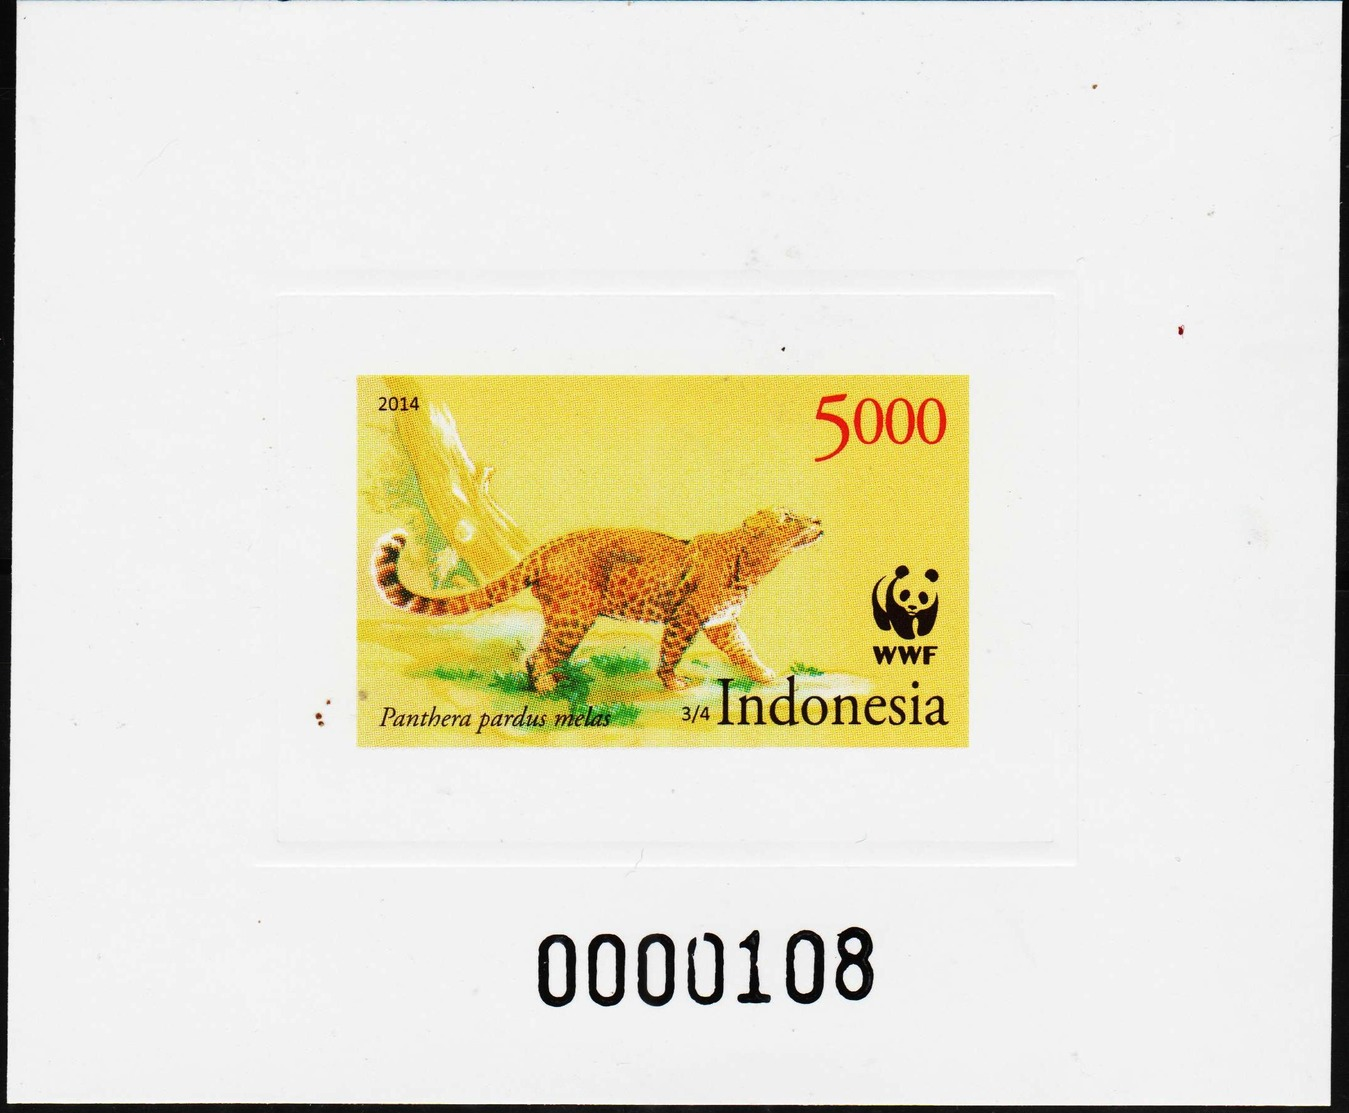 Ref #2510 Indonesia 2014 WWF - Four Nations Stampshow - Bandung, Indonesia